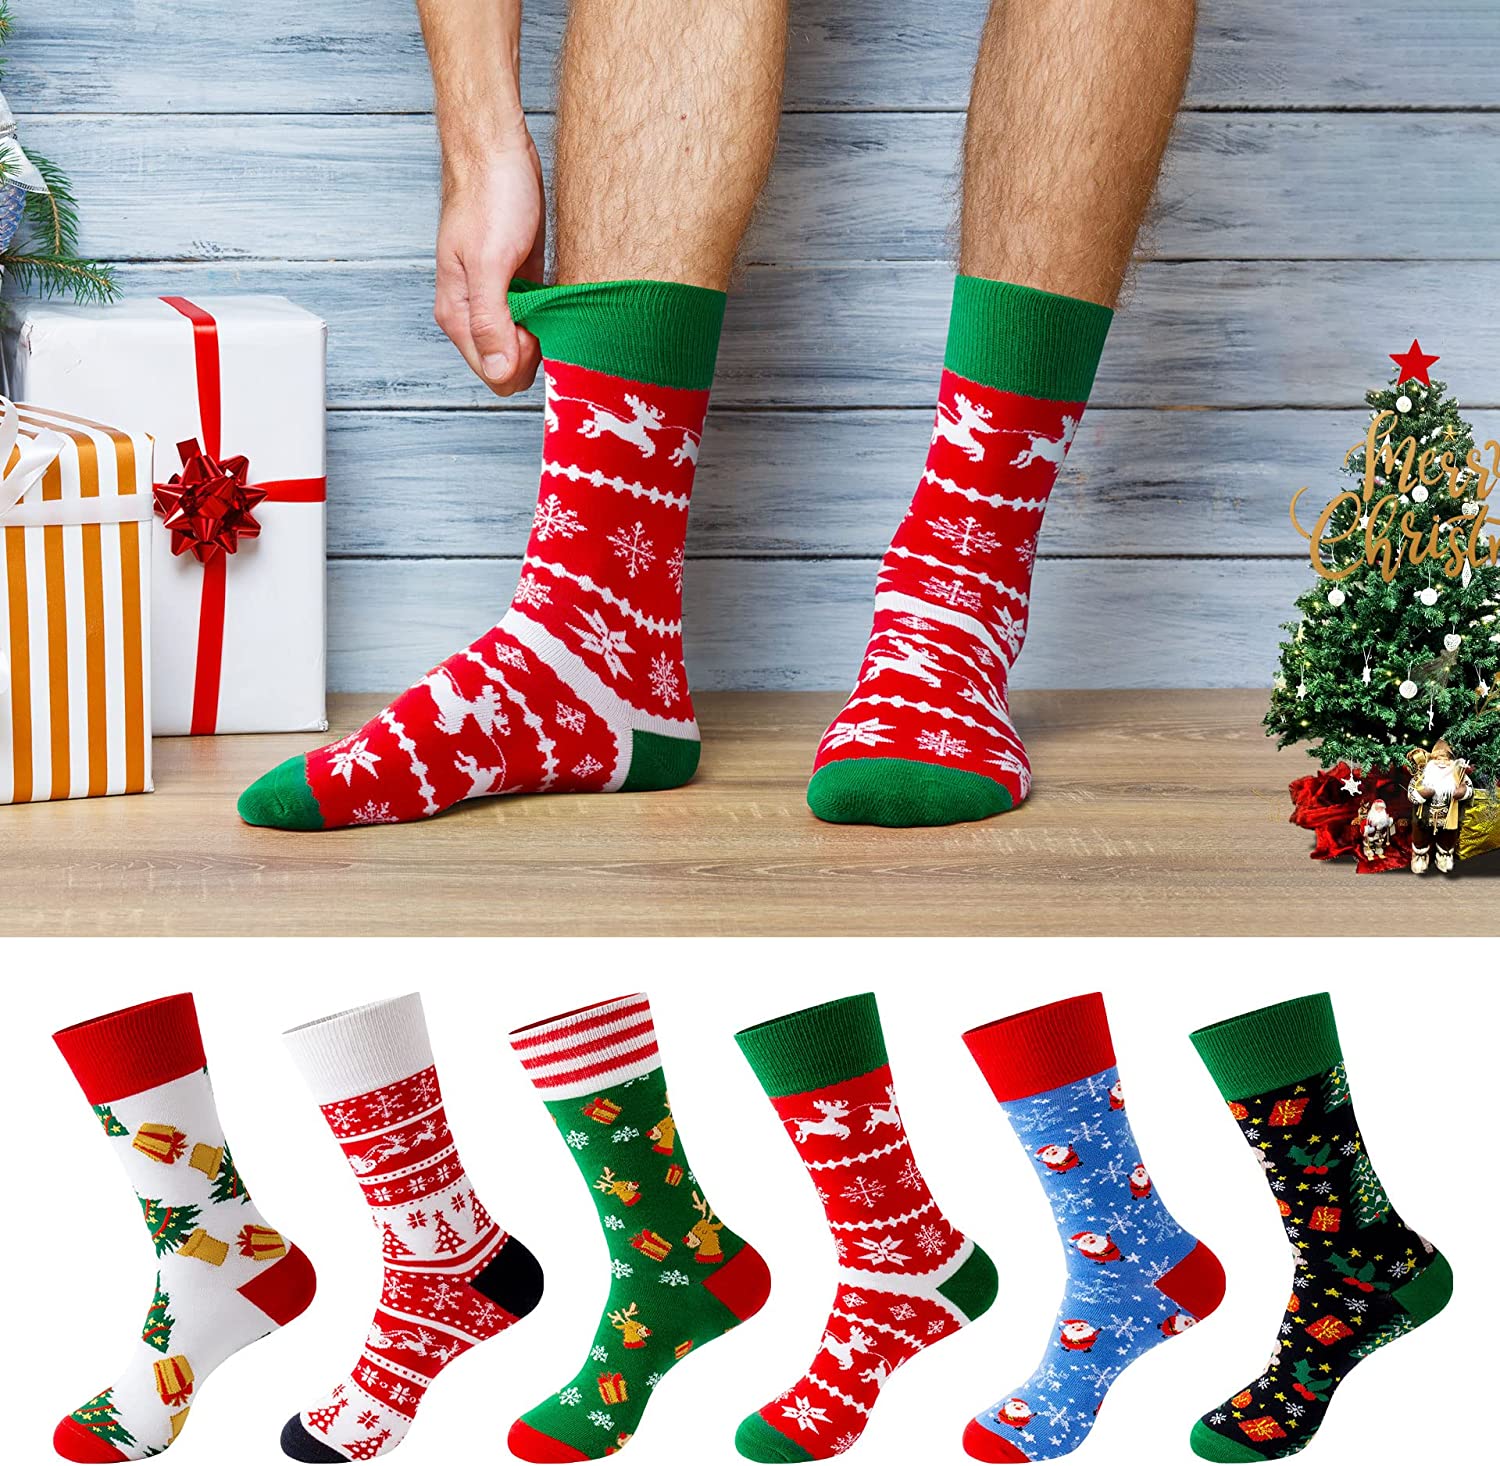 TENYSAF Fun Christmas Socks for Men - Funny Xmas Gifts for Men and Women Novelty Cozy Unisex Crew Cotton Sock Set